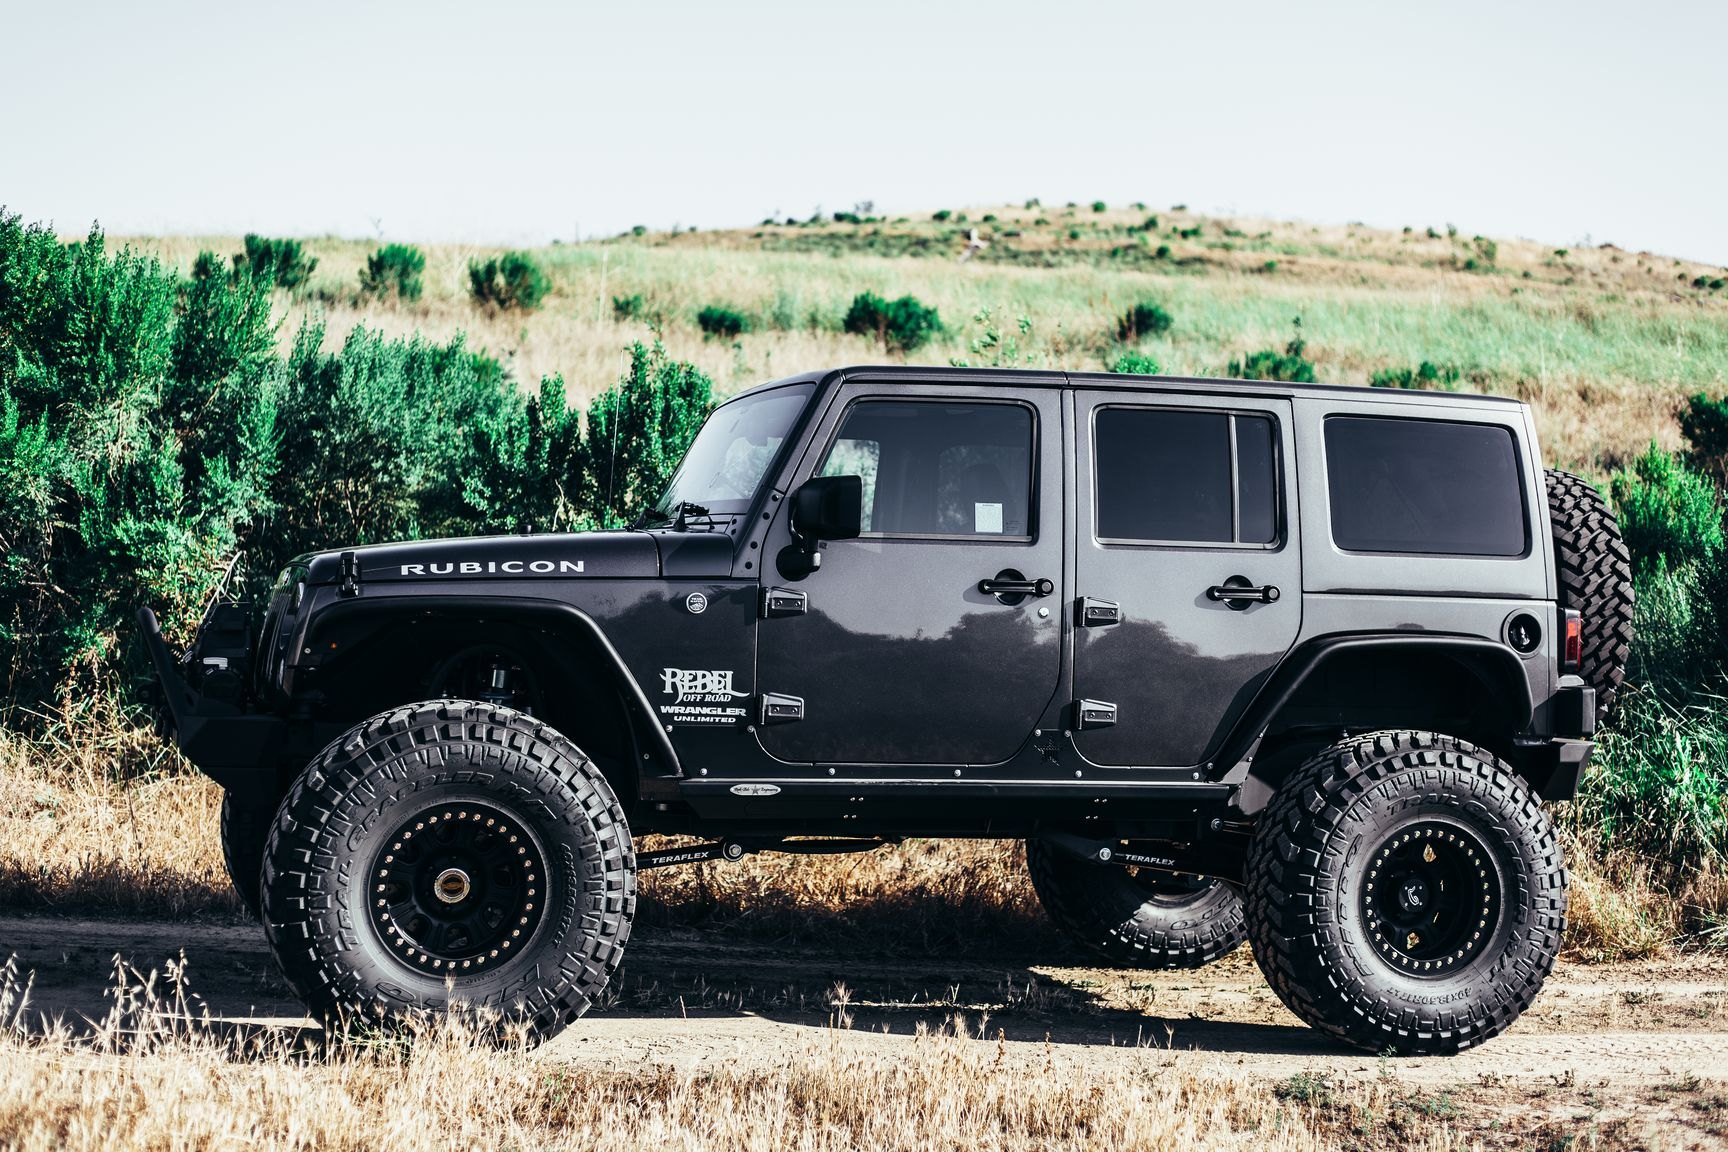 Perfect Fitment of Nitto Tires on Custom Black Lifted Jeep Wrangler —   Gallery